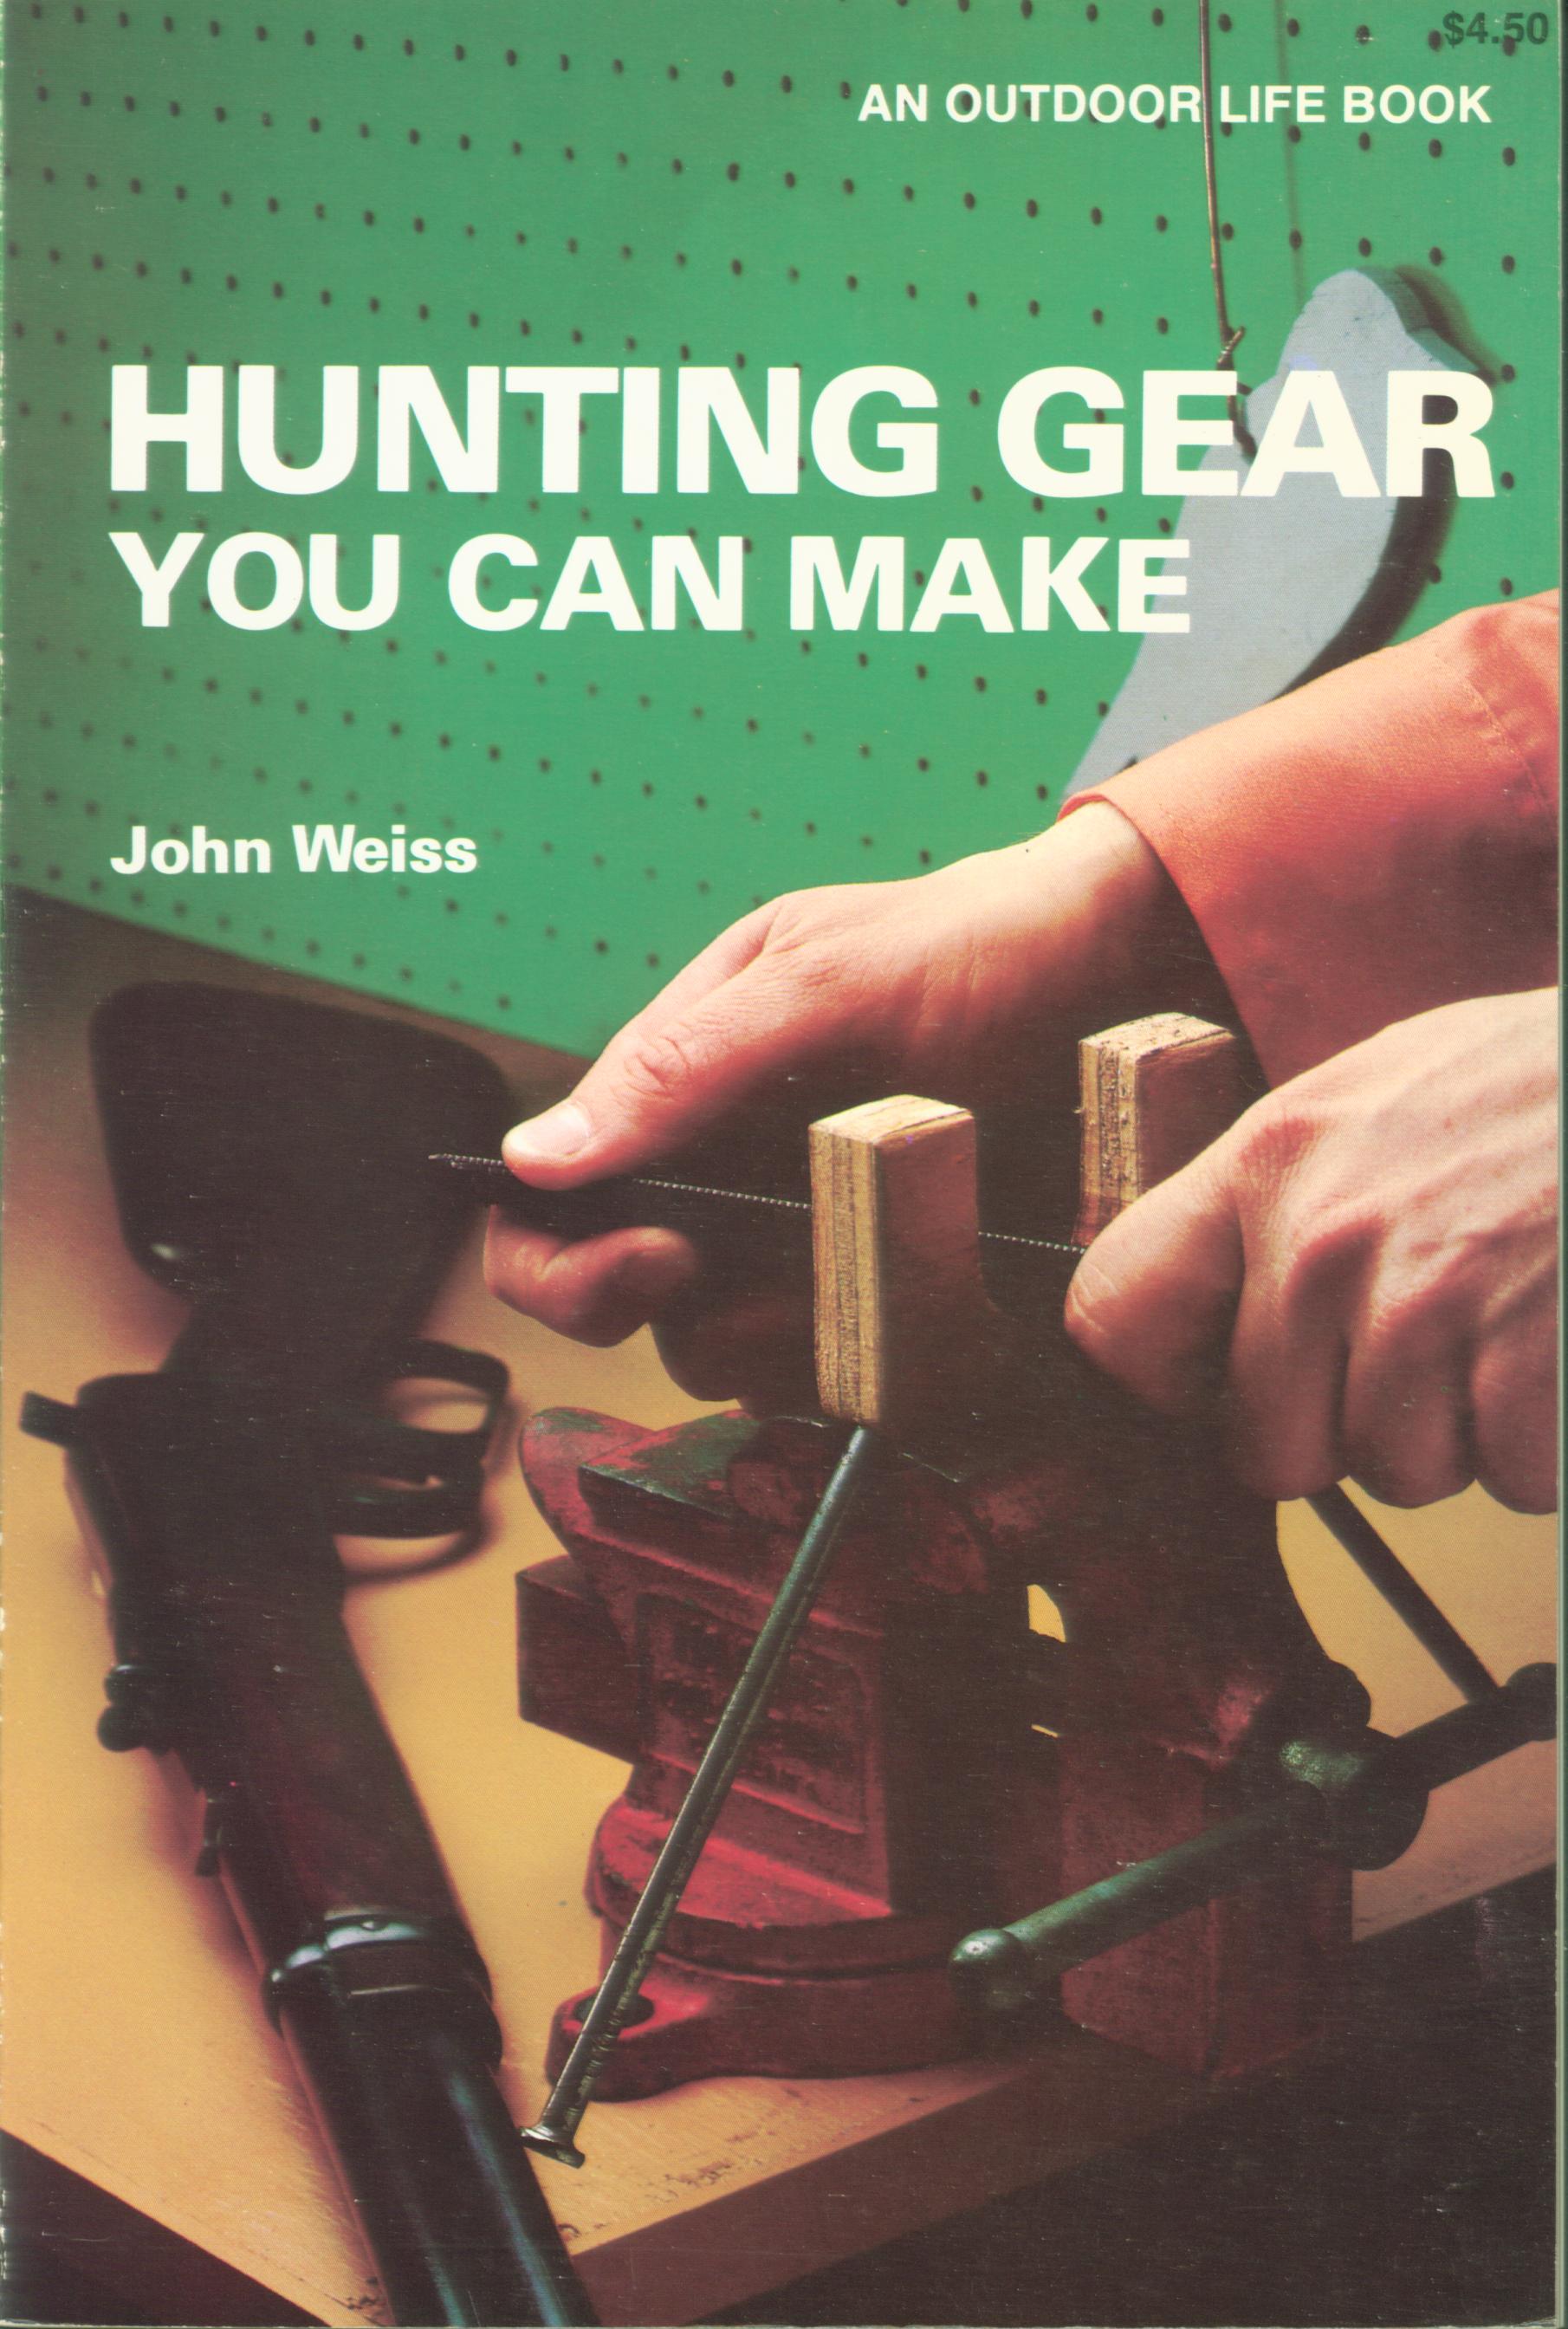 HUNTING GEAR YOU CAN MAKE. 